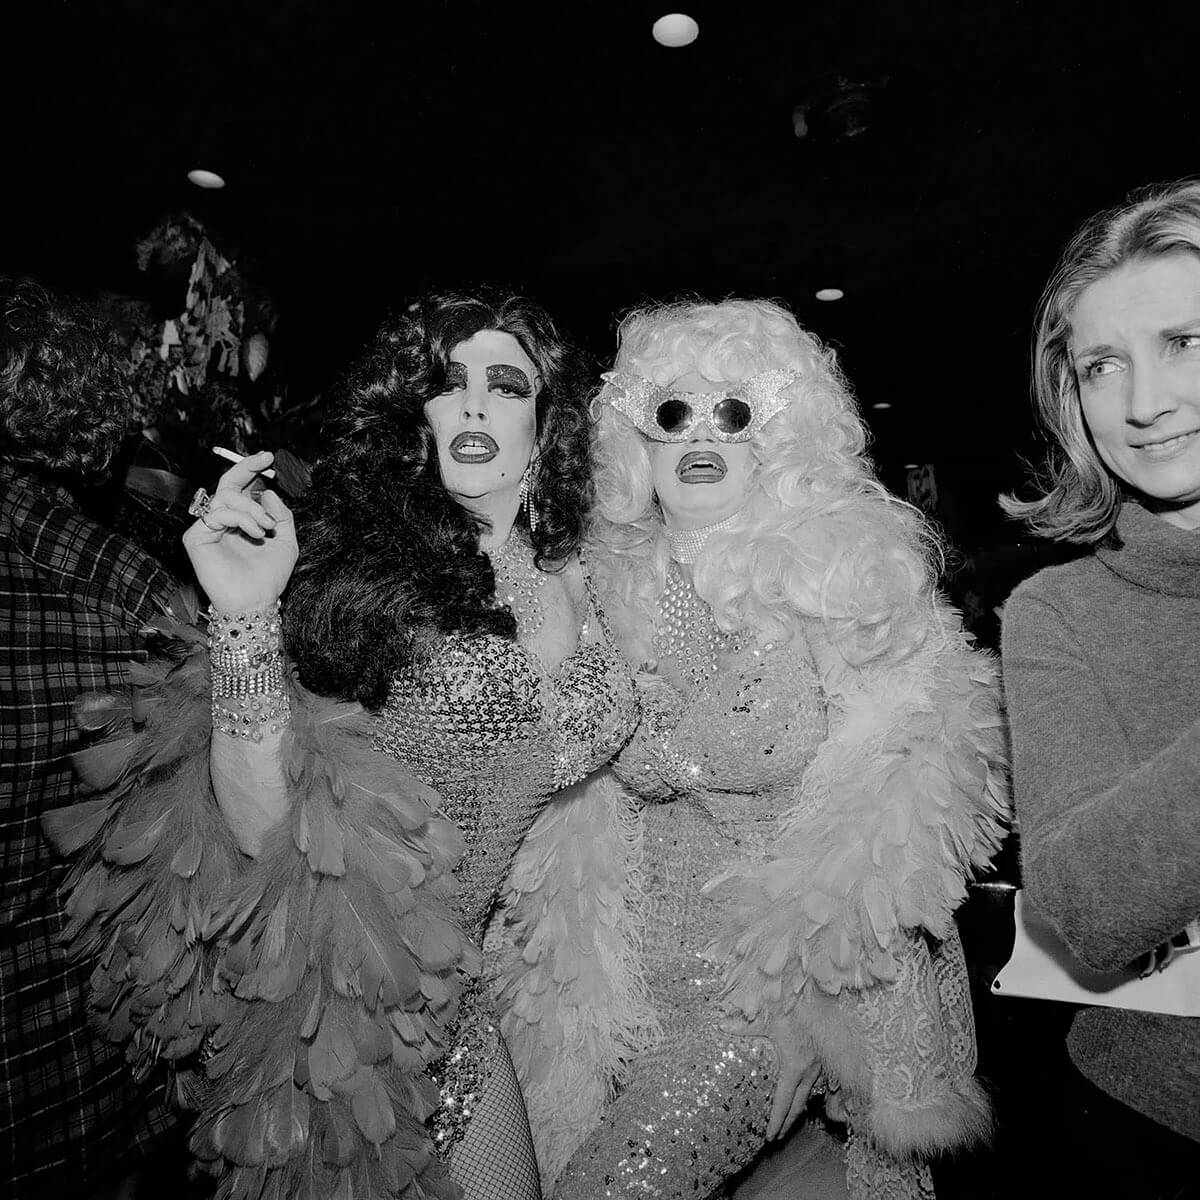 Two Queens, One Blonde, One Brunette, COYOTE Hookers Masquerade Ball, CopaCabana, NY, NY, February 14, 1977<p>© Meryl Meisler</p>